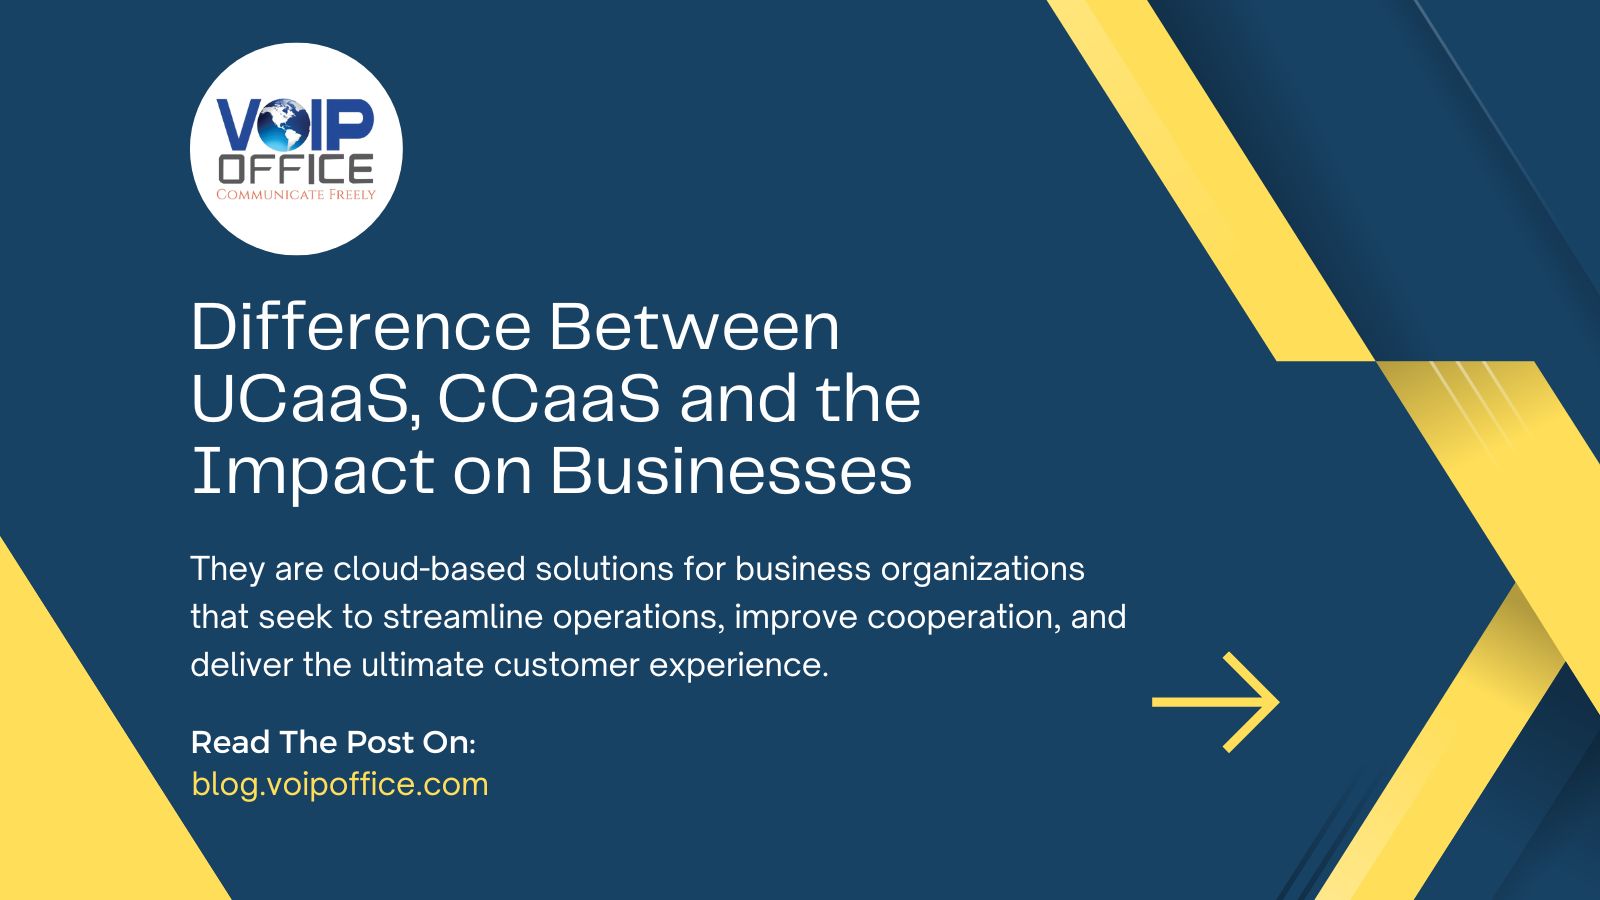 You are currently viewing Difference Between UCaaS, CCaaS and the Impact on Businesses